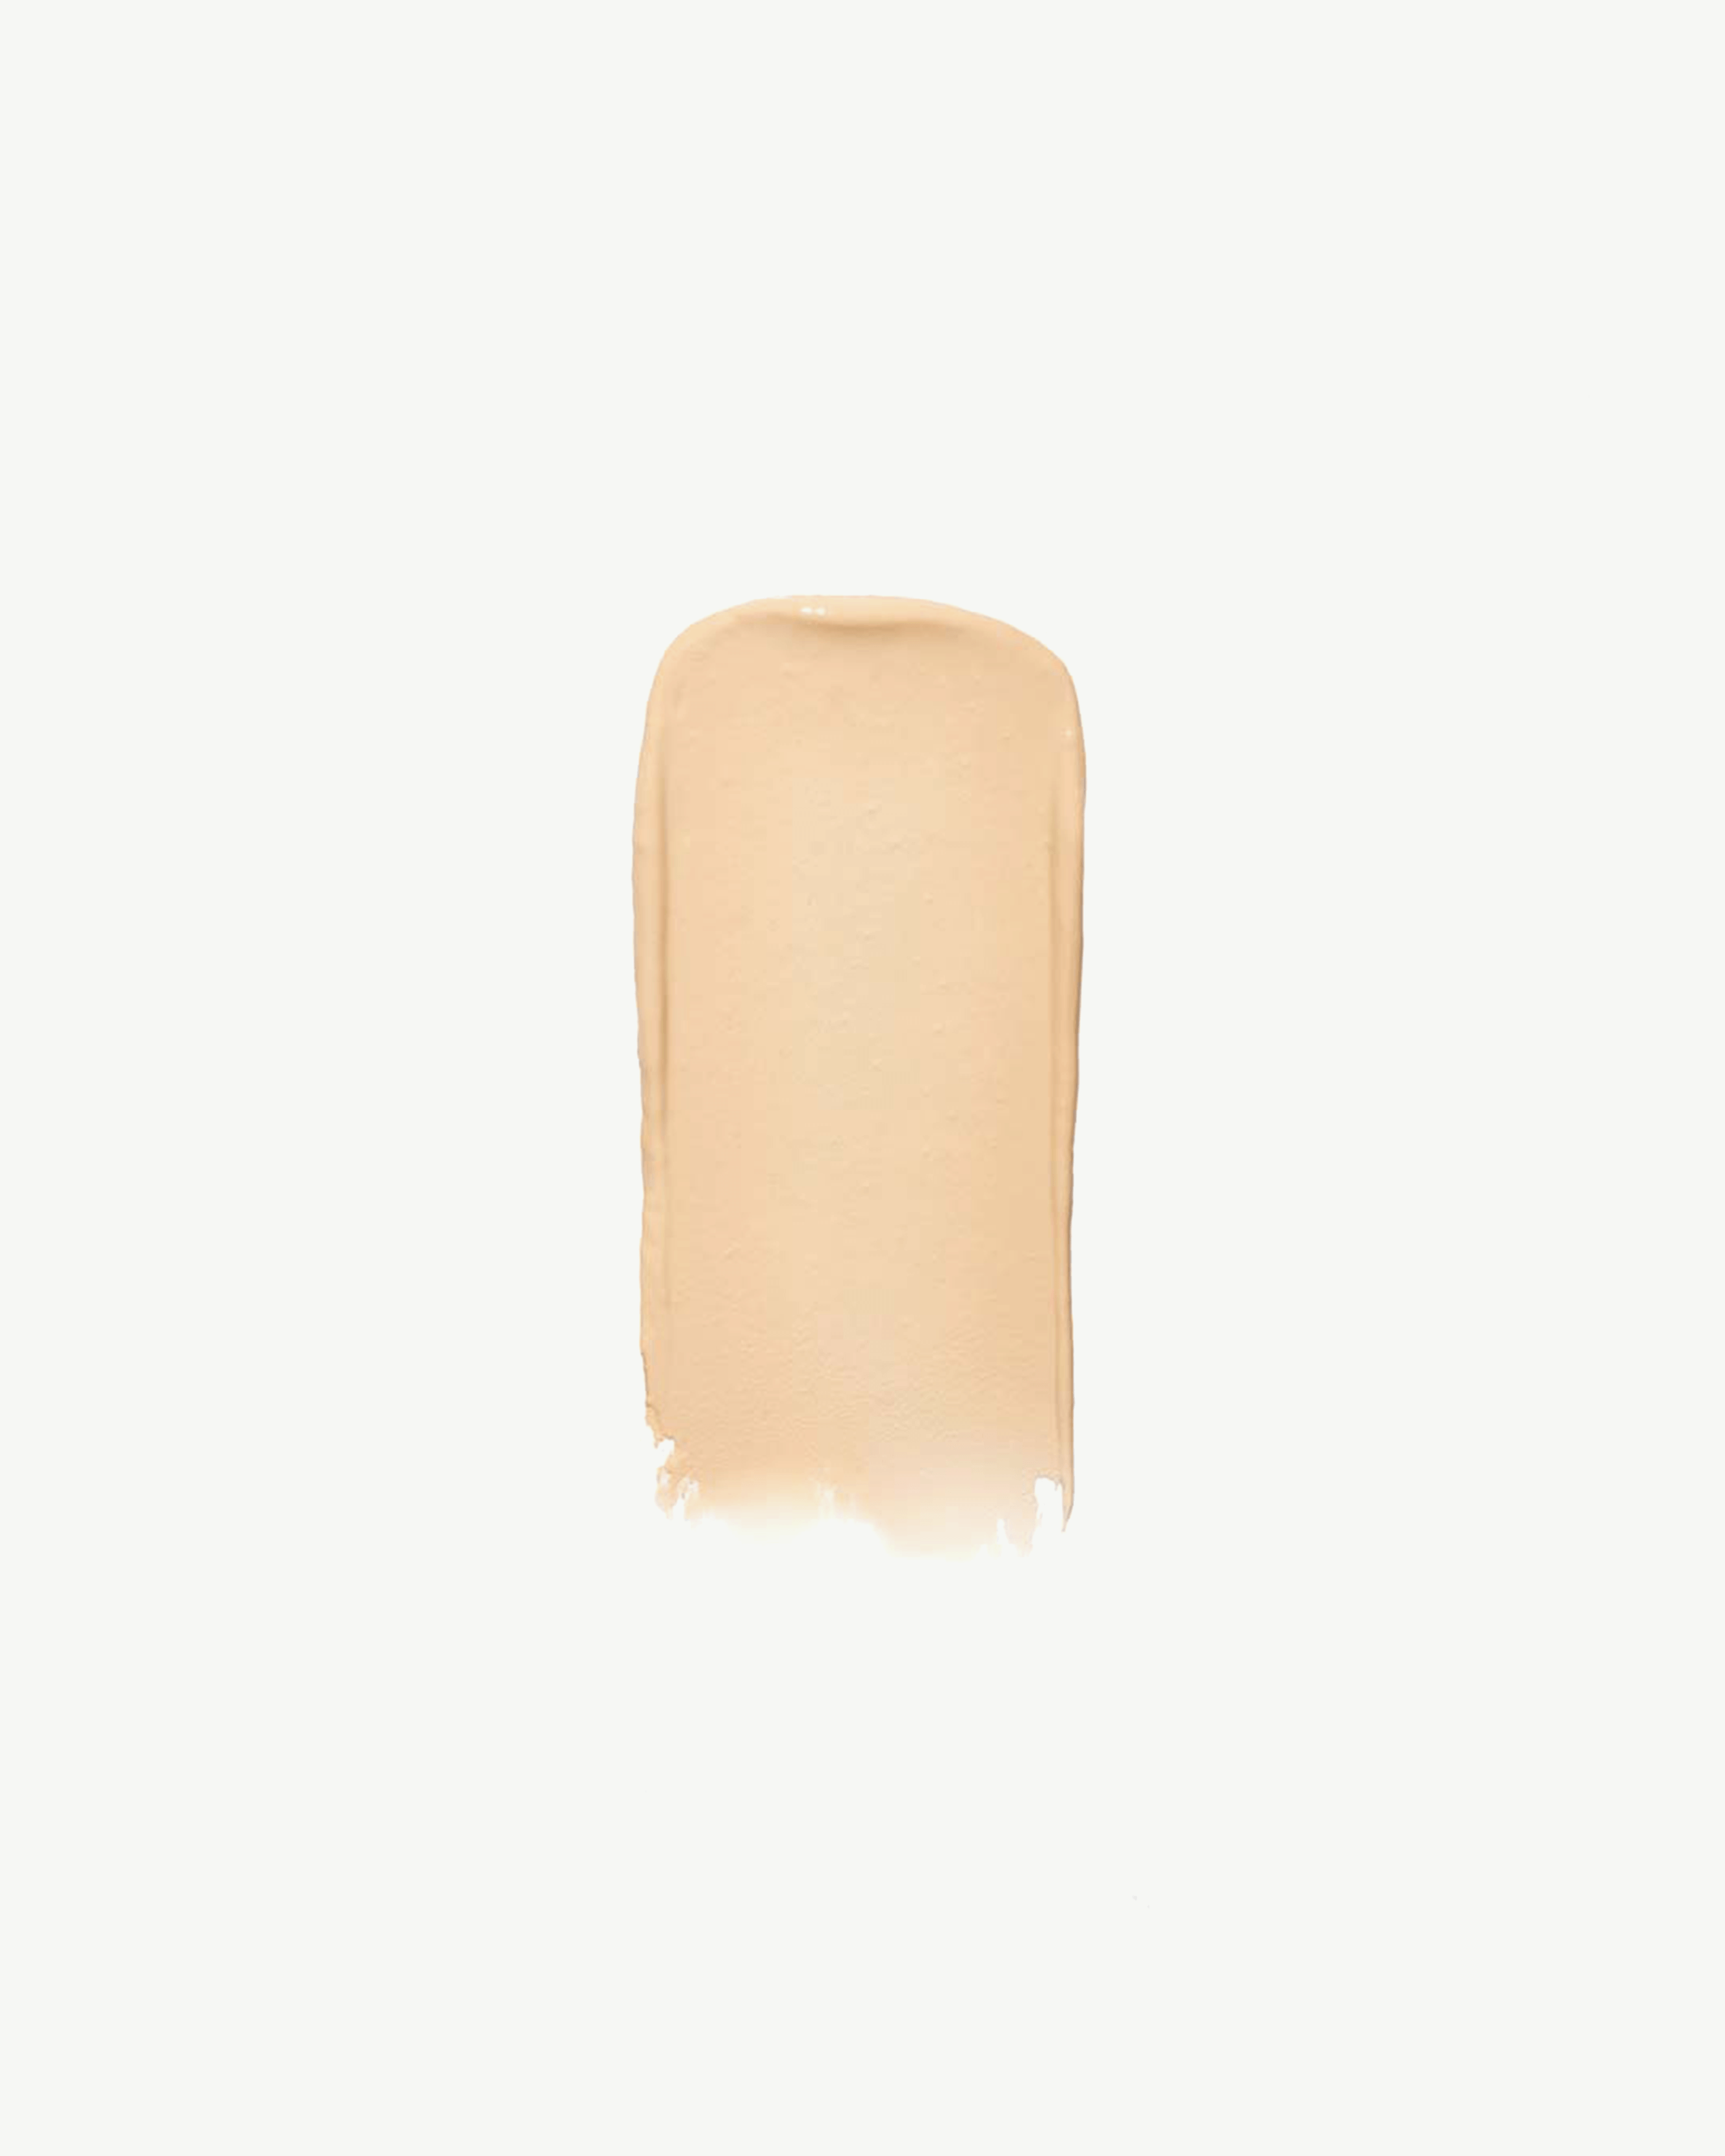 Shade 11 (for light skin with subtle yellow undertones)